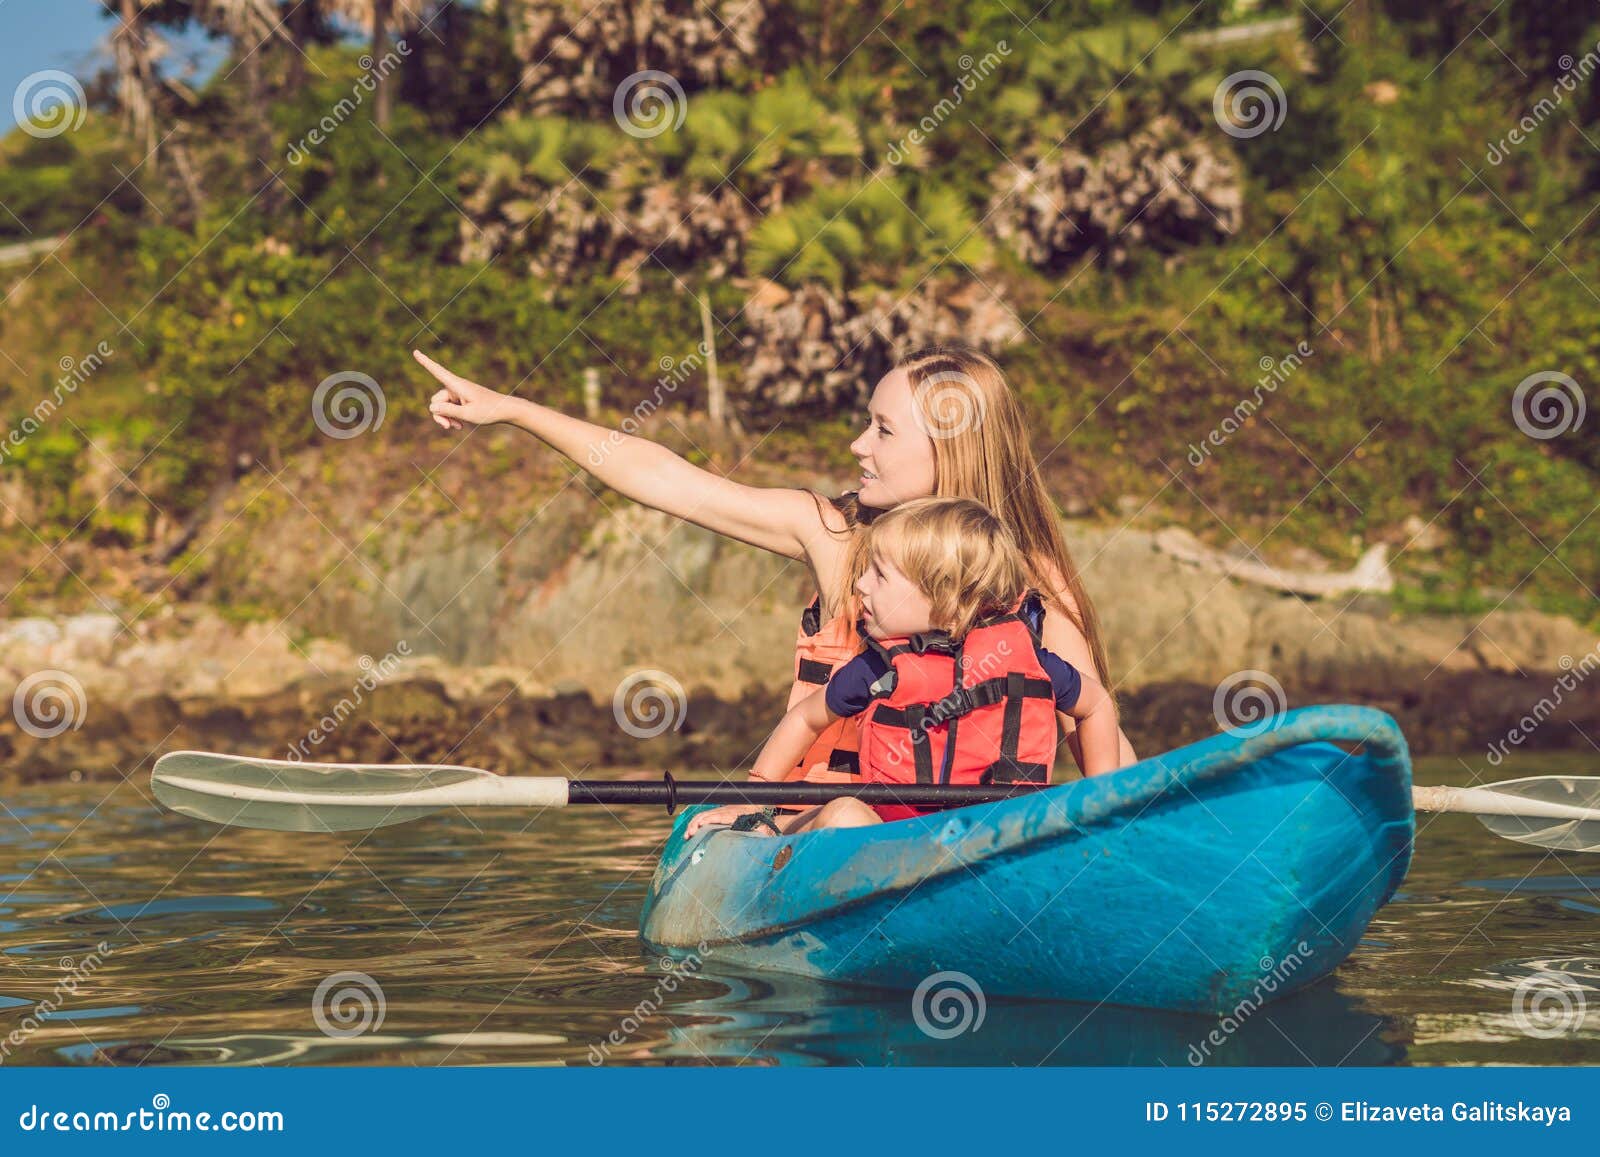 Mother and Son Kayaking at Tropical Ocean. Stock Image - Image of canoe ...